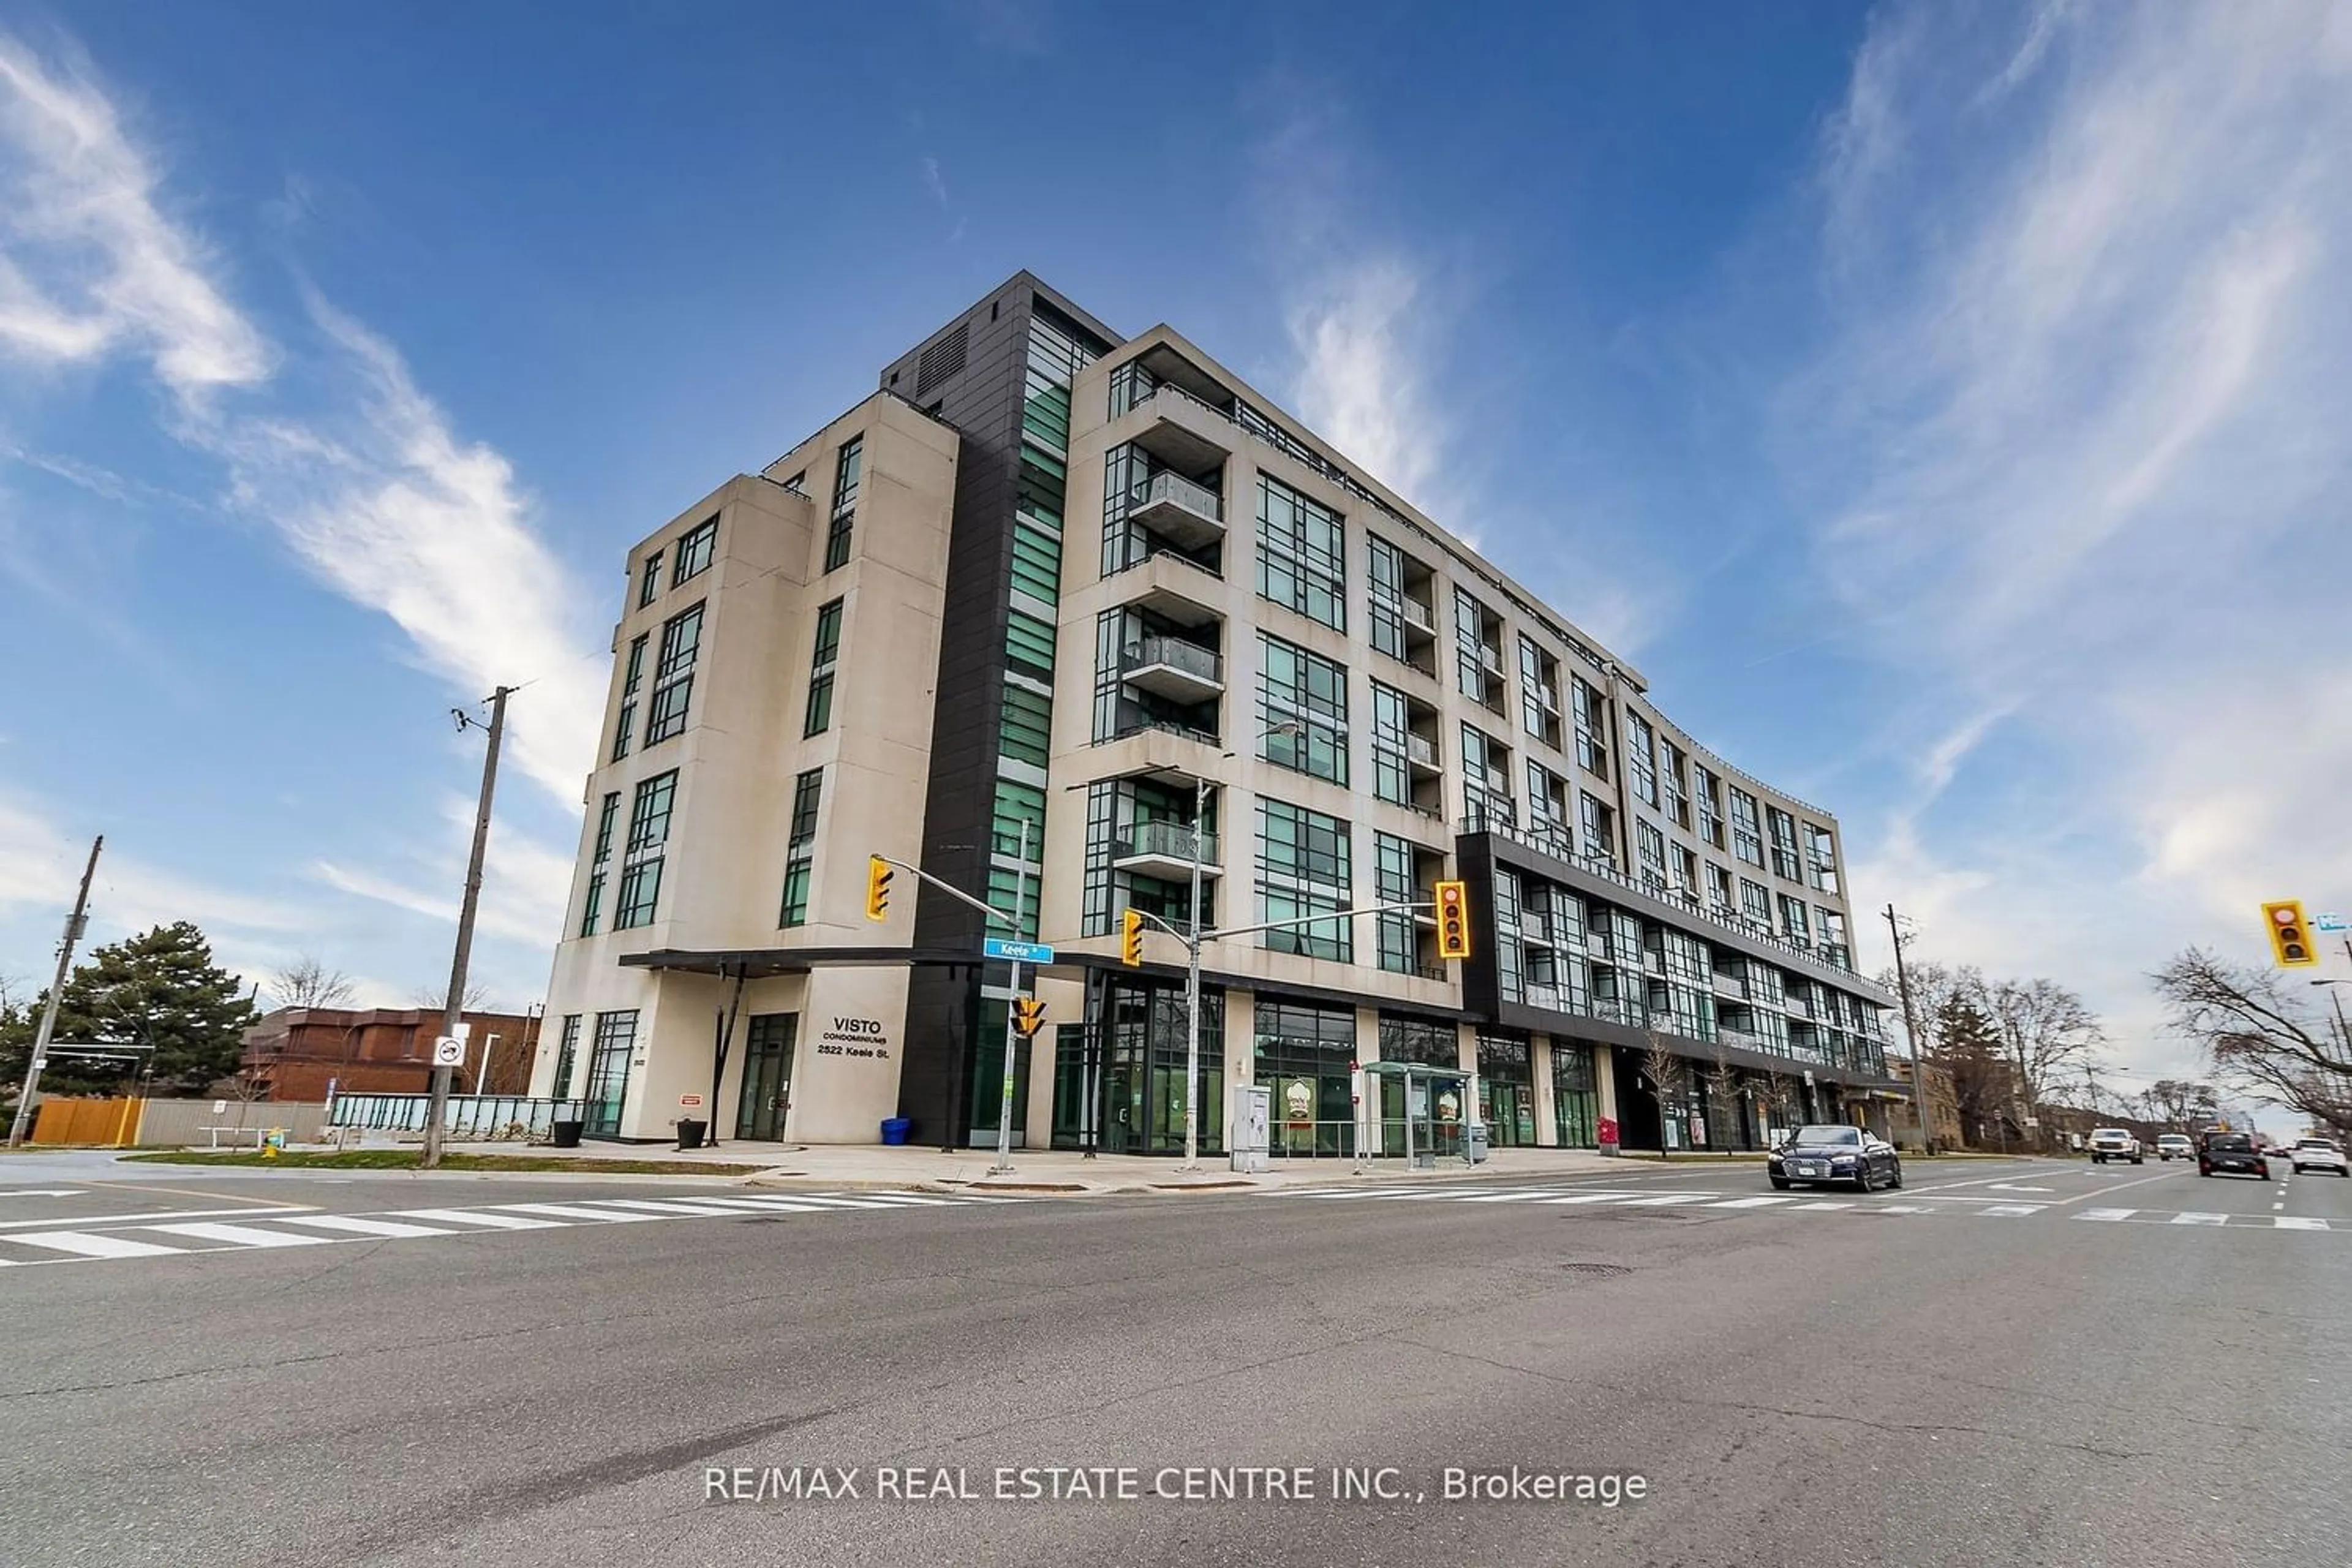 A pic from exterior of the house or condo for 2522 Keele St #214, Toronto Ontario M6L 2N8